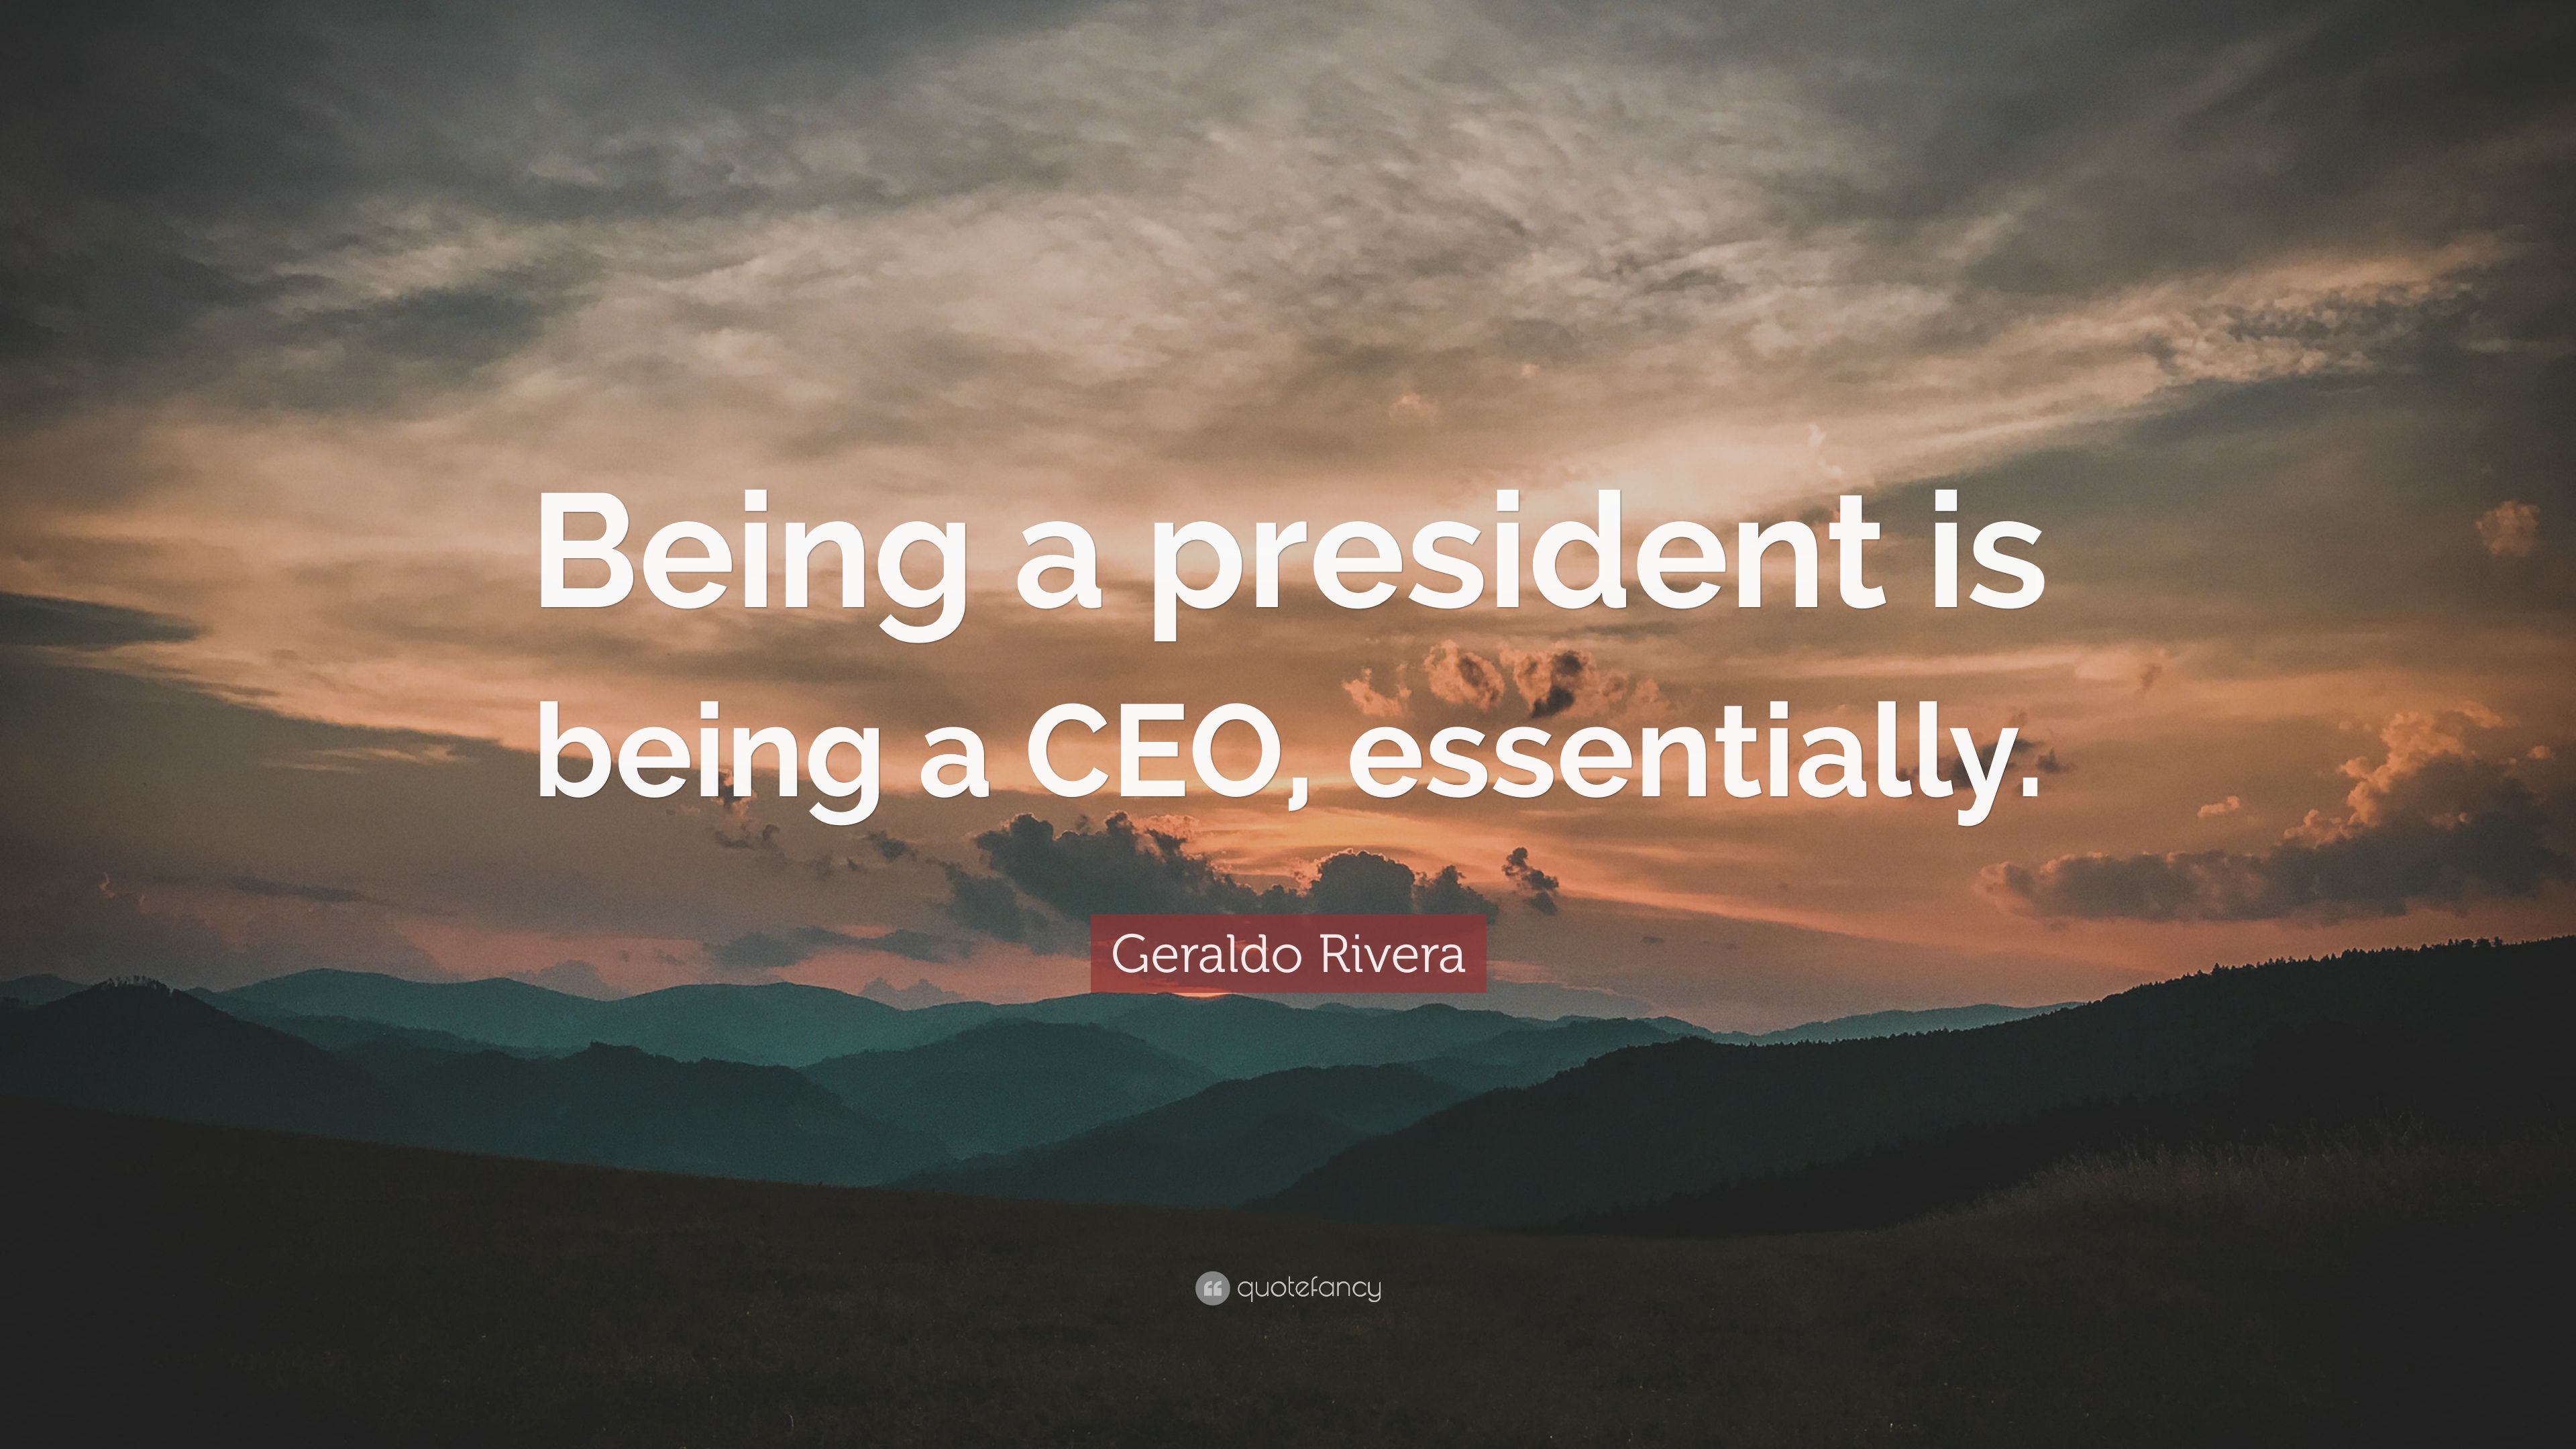 Geraldo Rivera Quote: “Being a president is being a CEO, essentially.” (7 wallpaper)